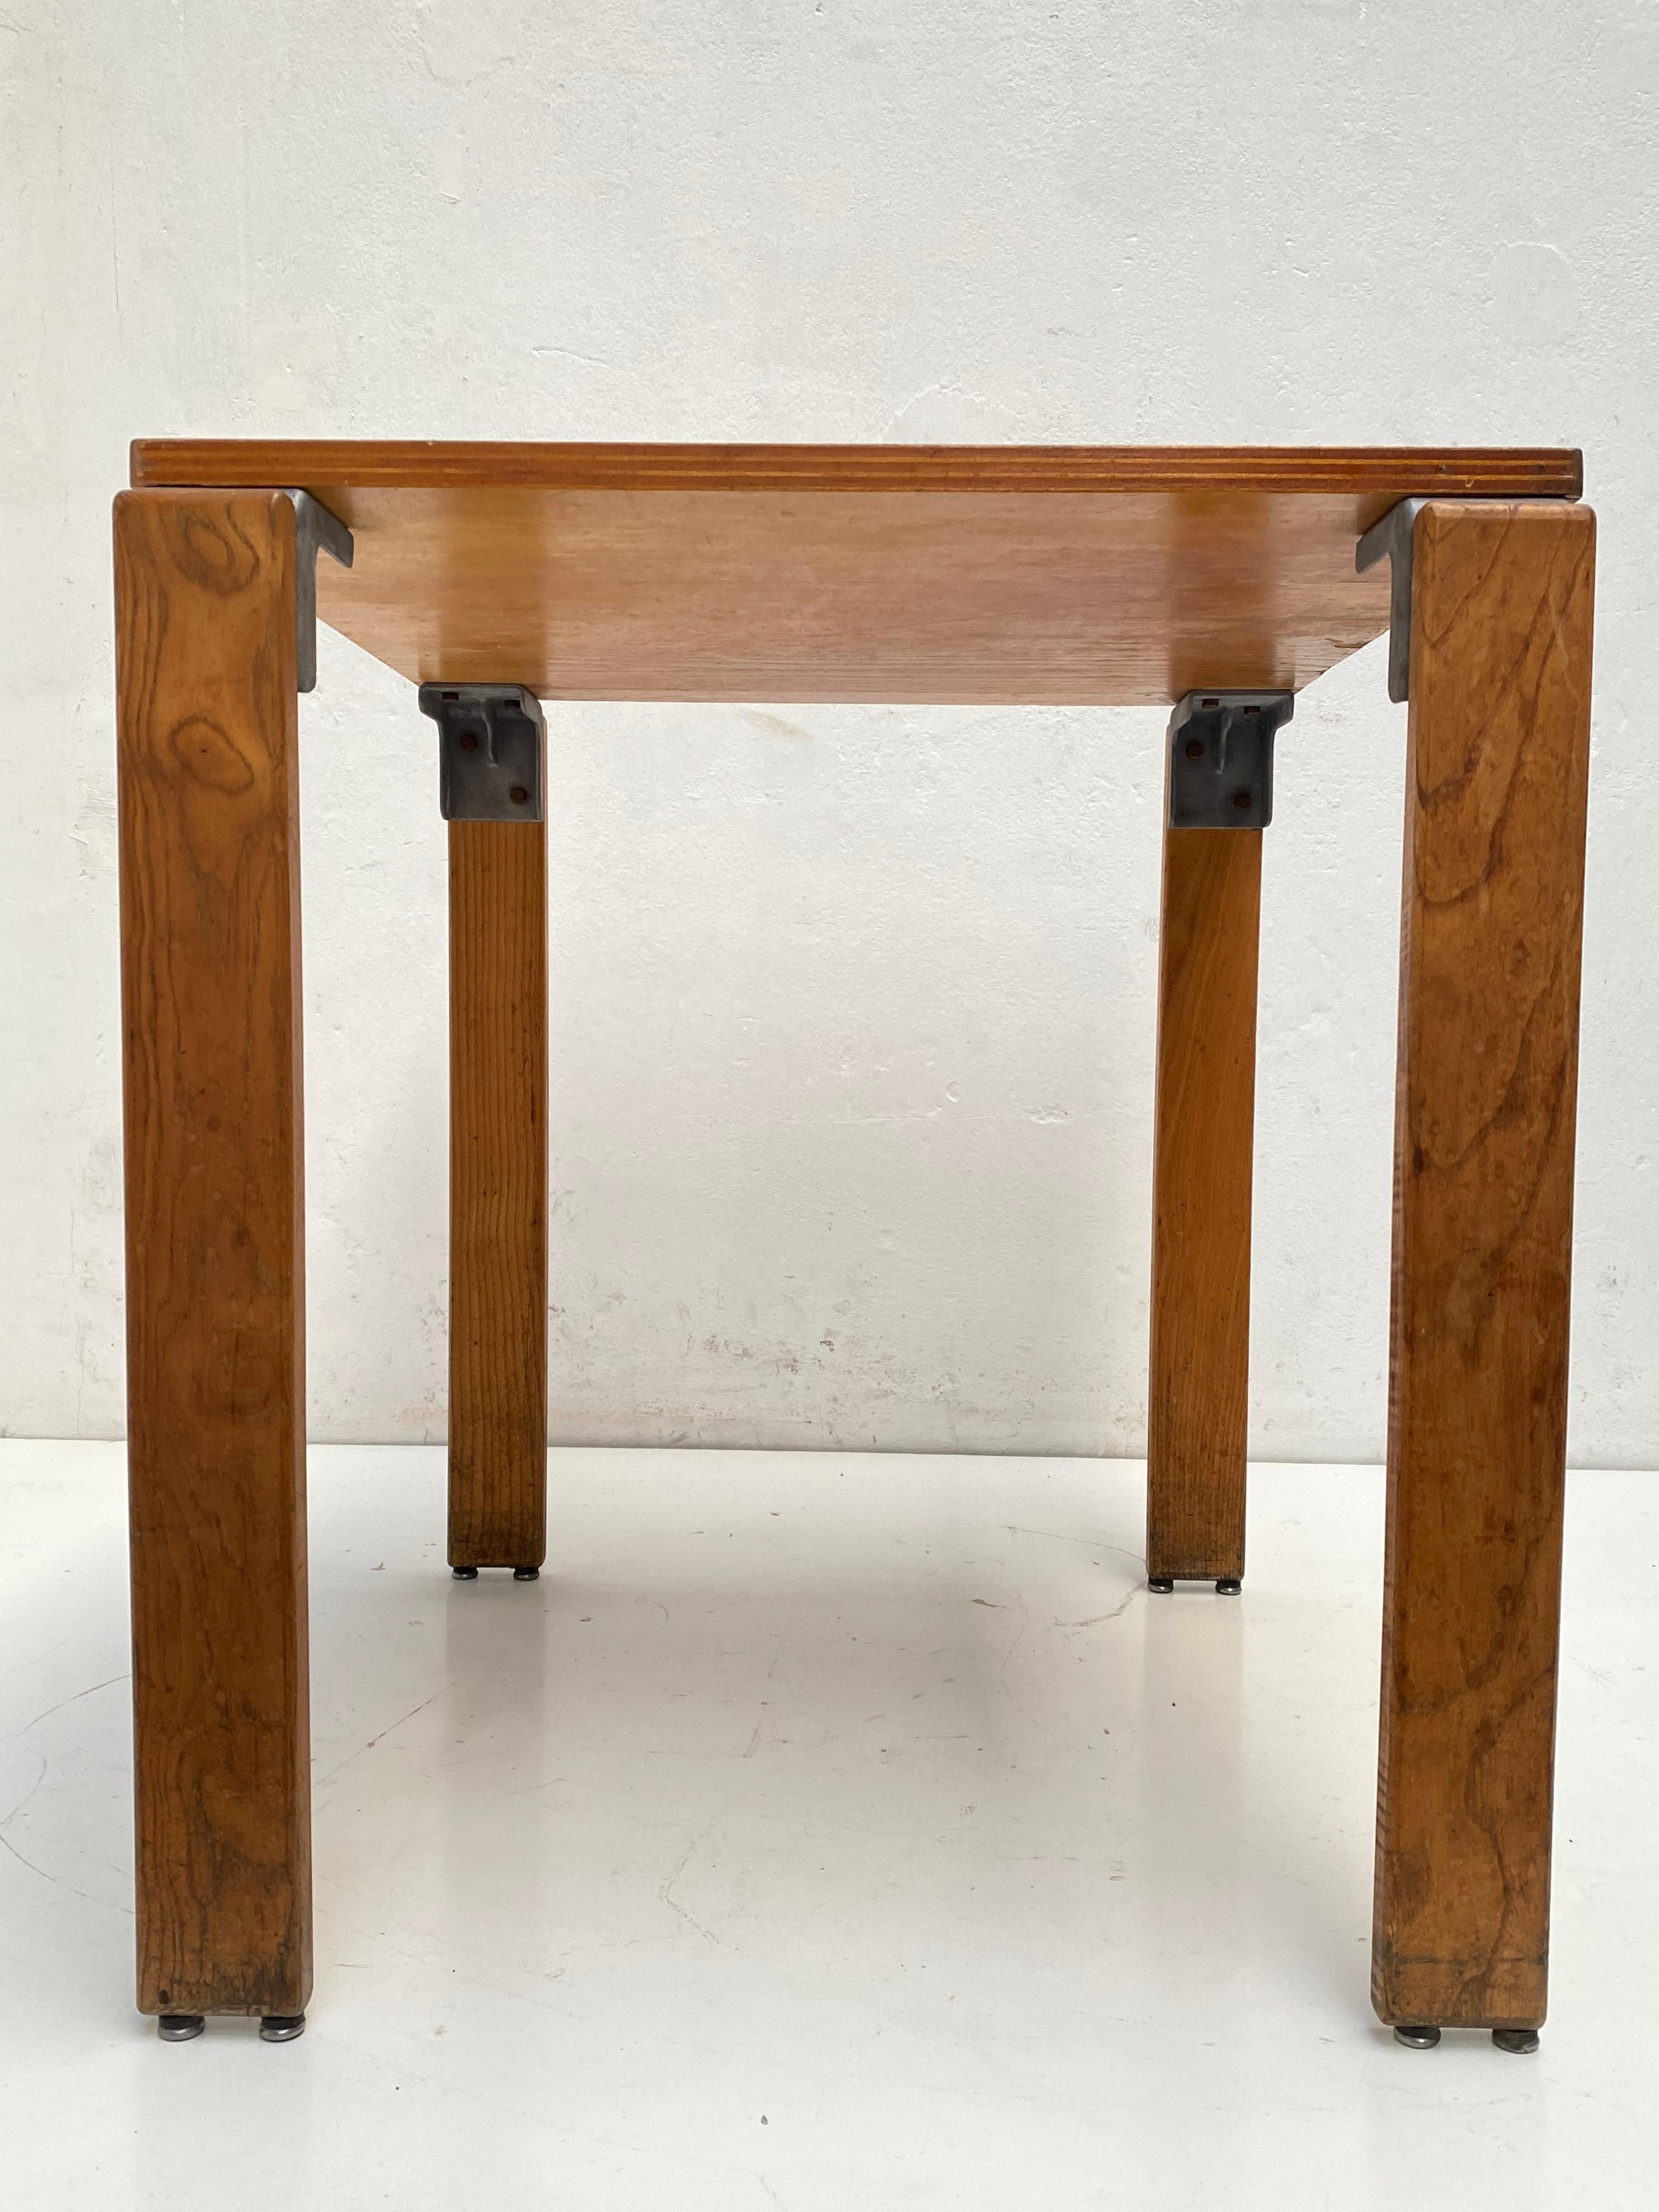 A rare dining table designed by architect Georges Candilis (1913-1995) .Candelis created this furniture for the 'Les Carrats' holiday resort that he designed in Port-Leucate, France with Finnish interior designer Anja Blomstedt (who also worked